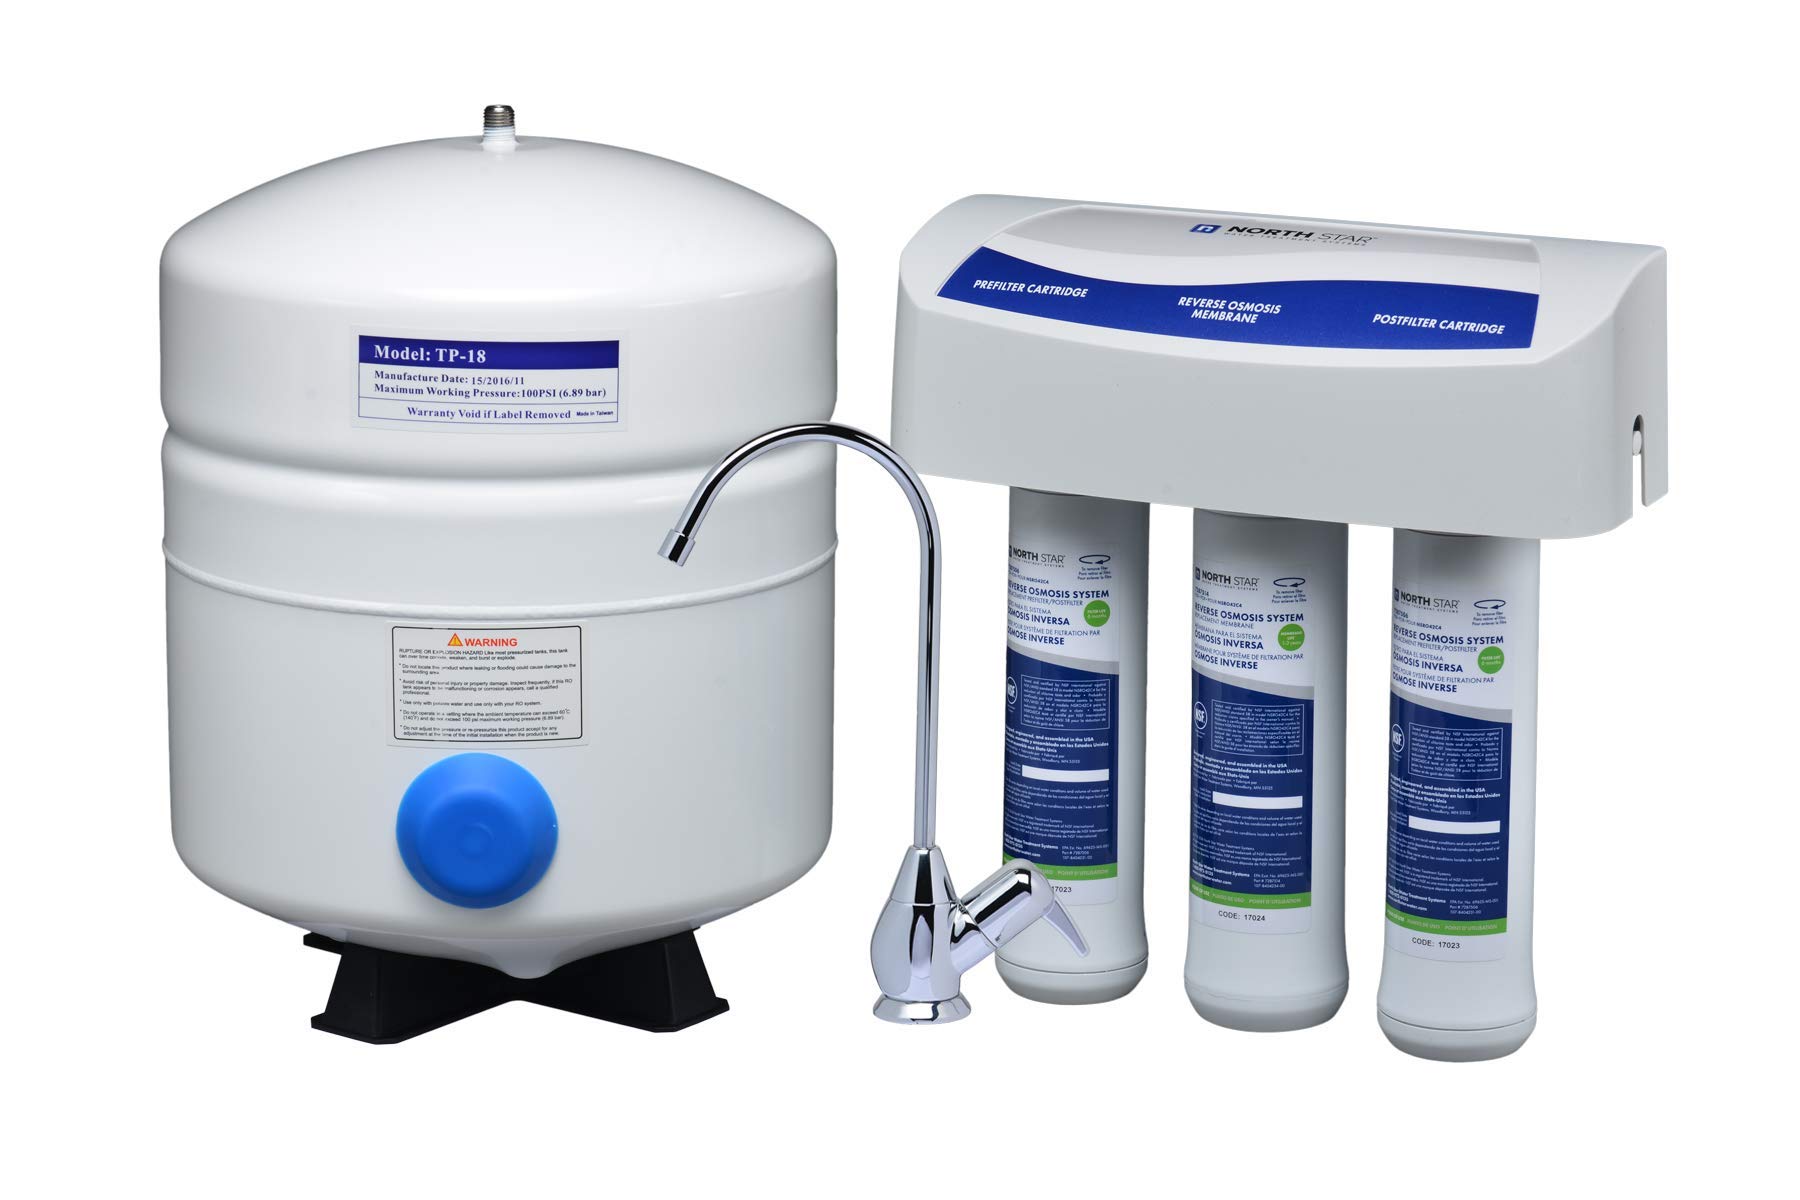 North Star Nsro42C4 Reverse Osmosis Under Sink Drinking Water Filtration System (7287695)  3 Stage System Includes Membrane And 